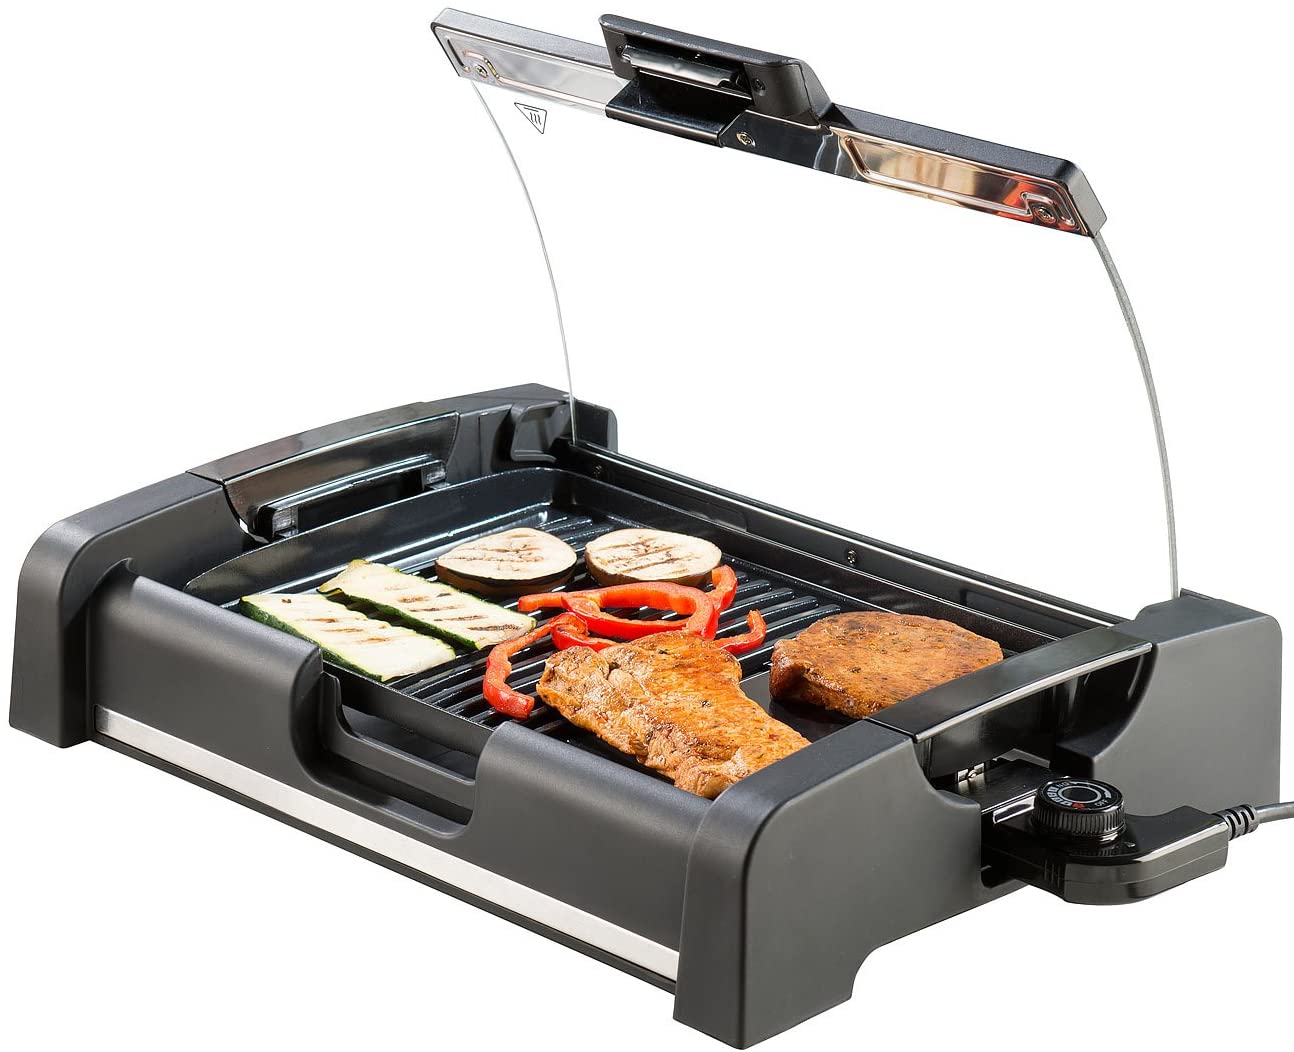 ROSENSTEIN & SOHNE Rosenstein & Söhne Table grill with lid: table grill with glass lid, ceramic coated grill plate, 1650 W (electric grill plate)